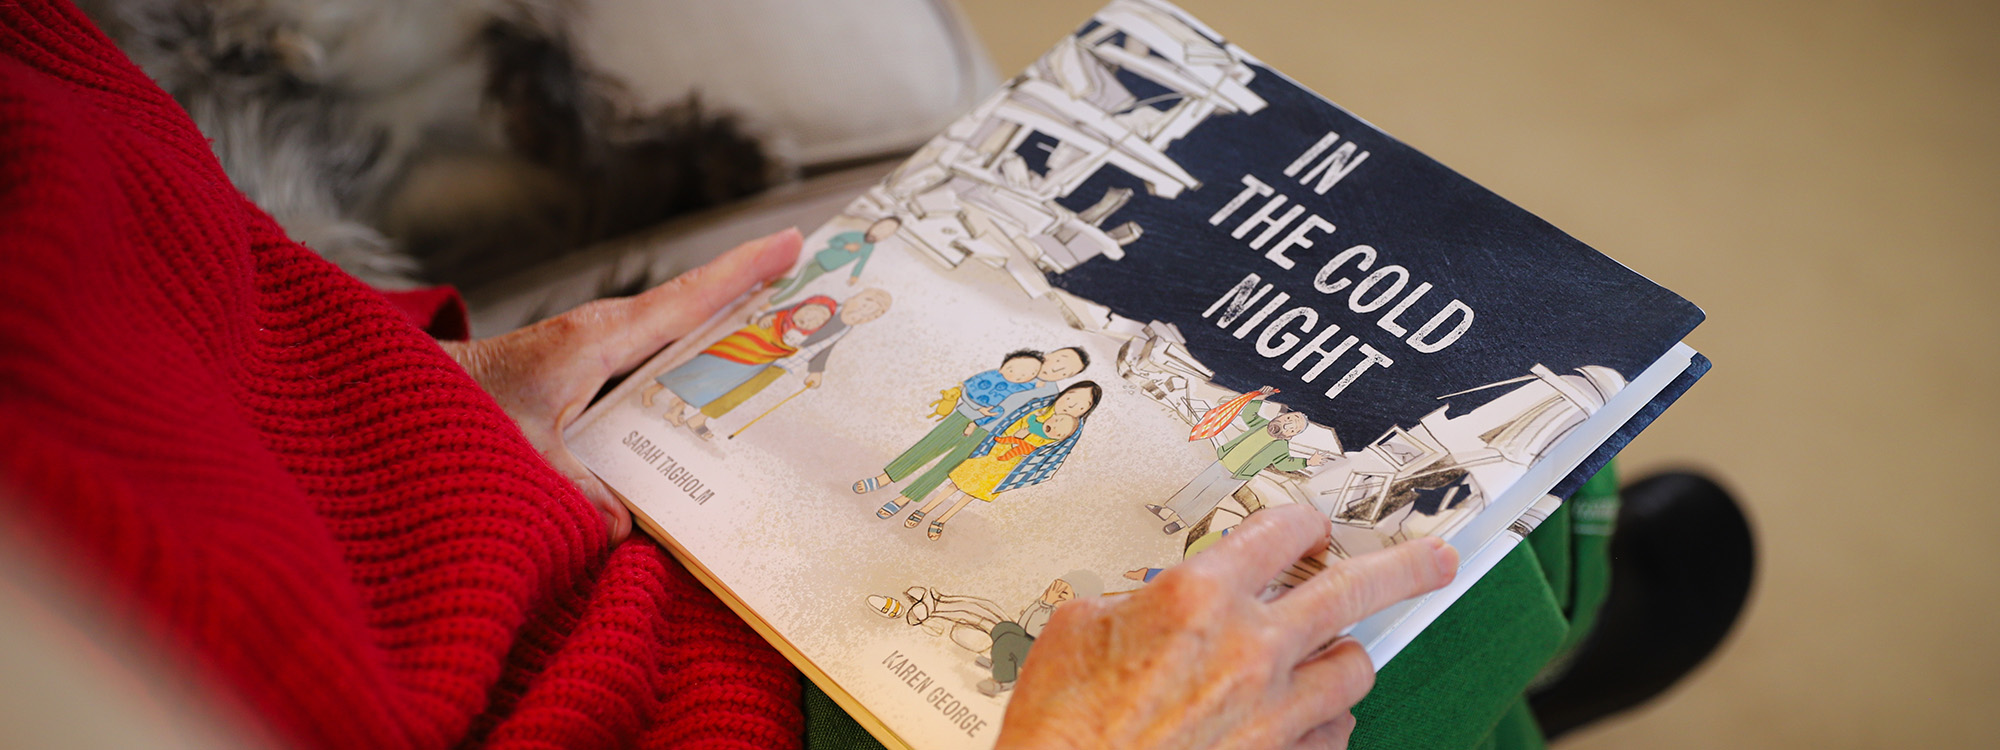 Book titled 'In the Cold Night' with illustrations by Karen George resting on someone's lap